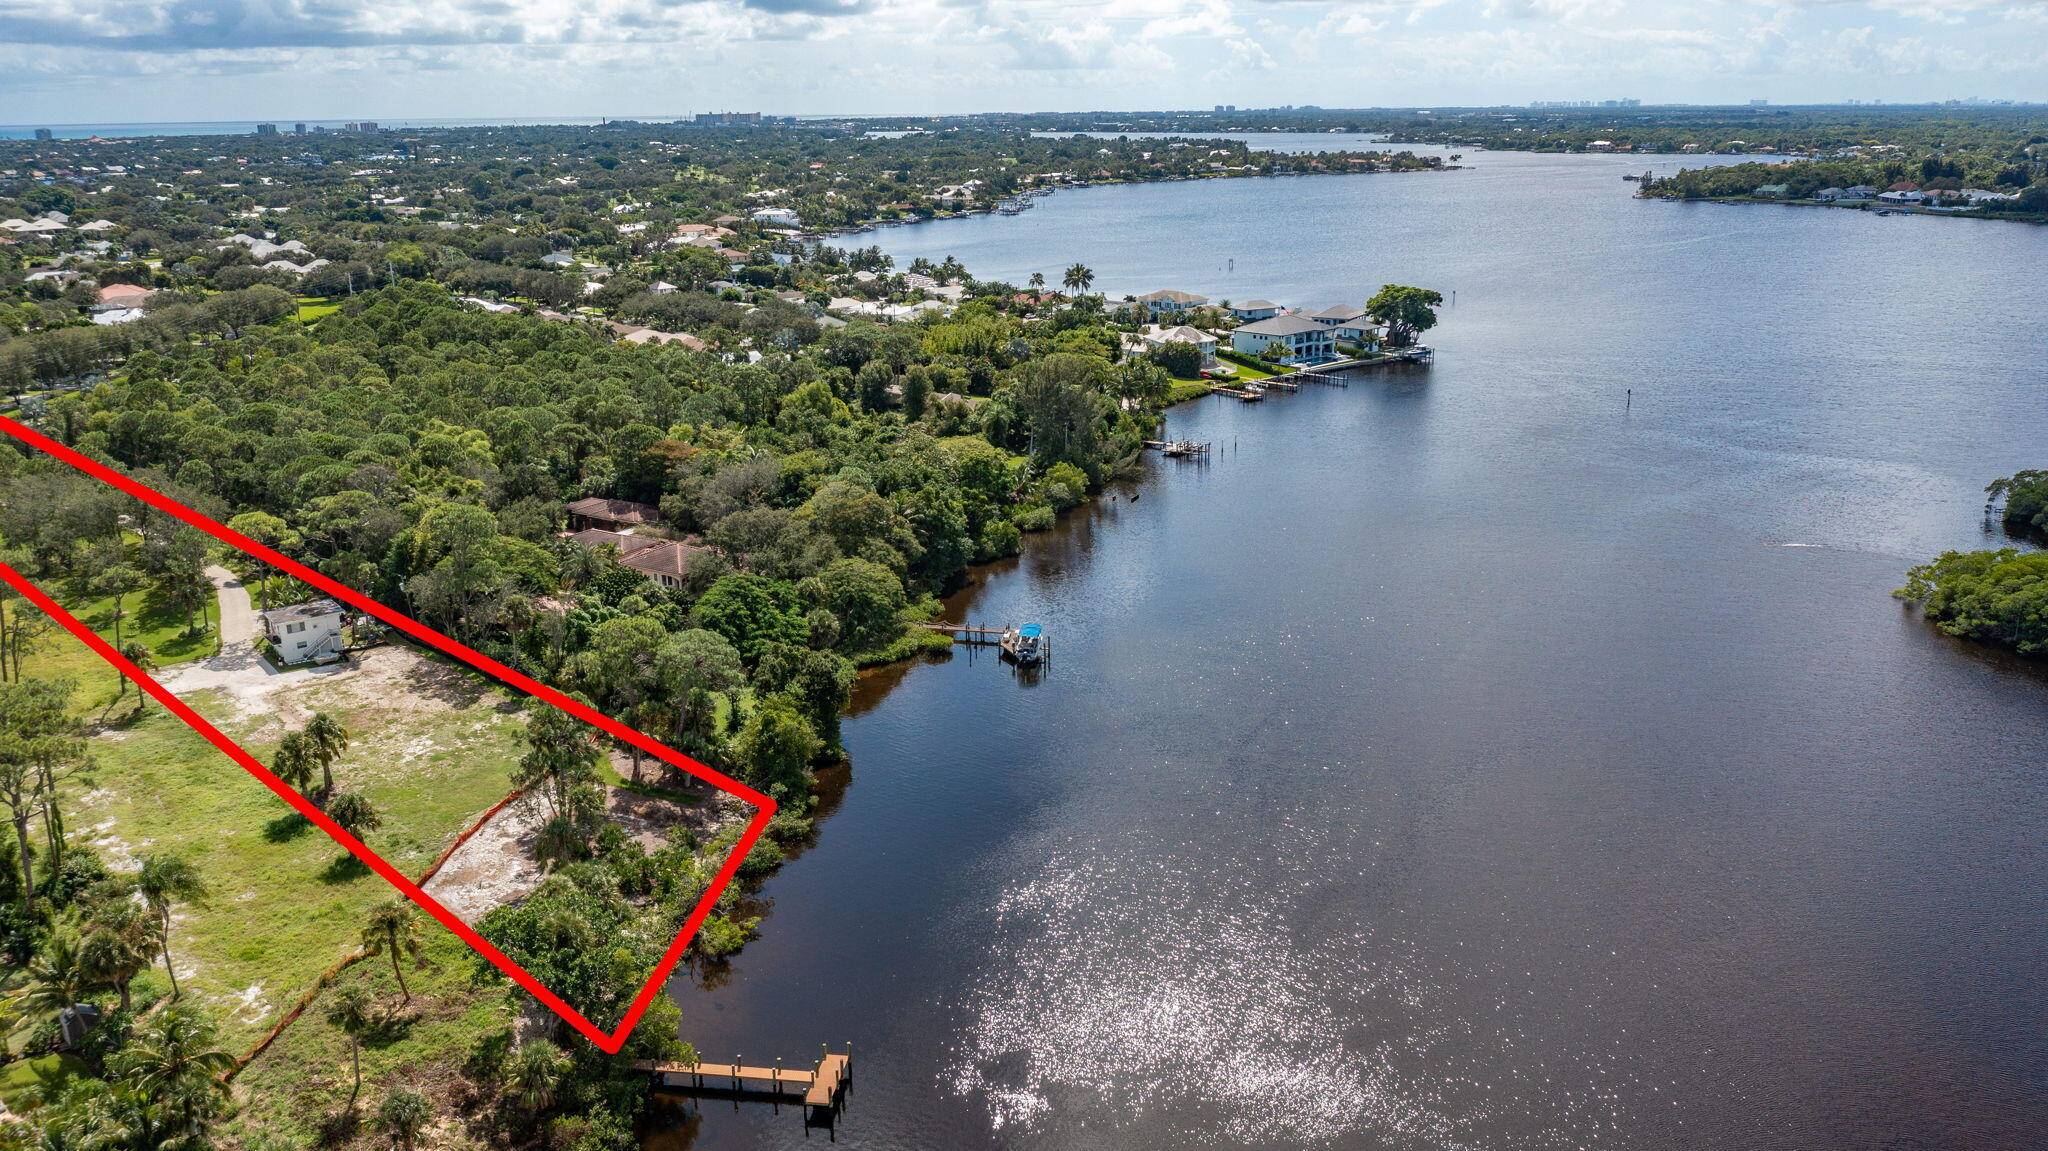 AMAZING OPPORTUNITY to purchase one of the last estate lots to come to the market on the coveted Loxahatchee River.